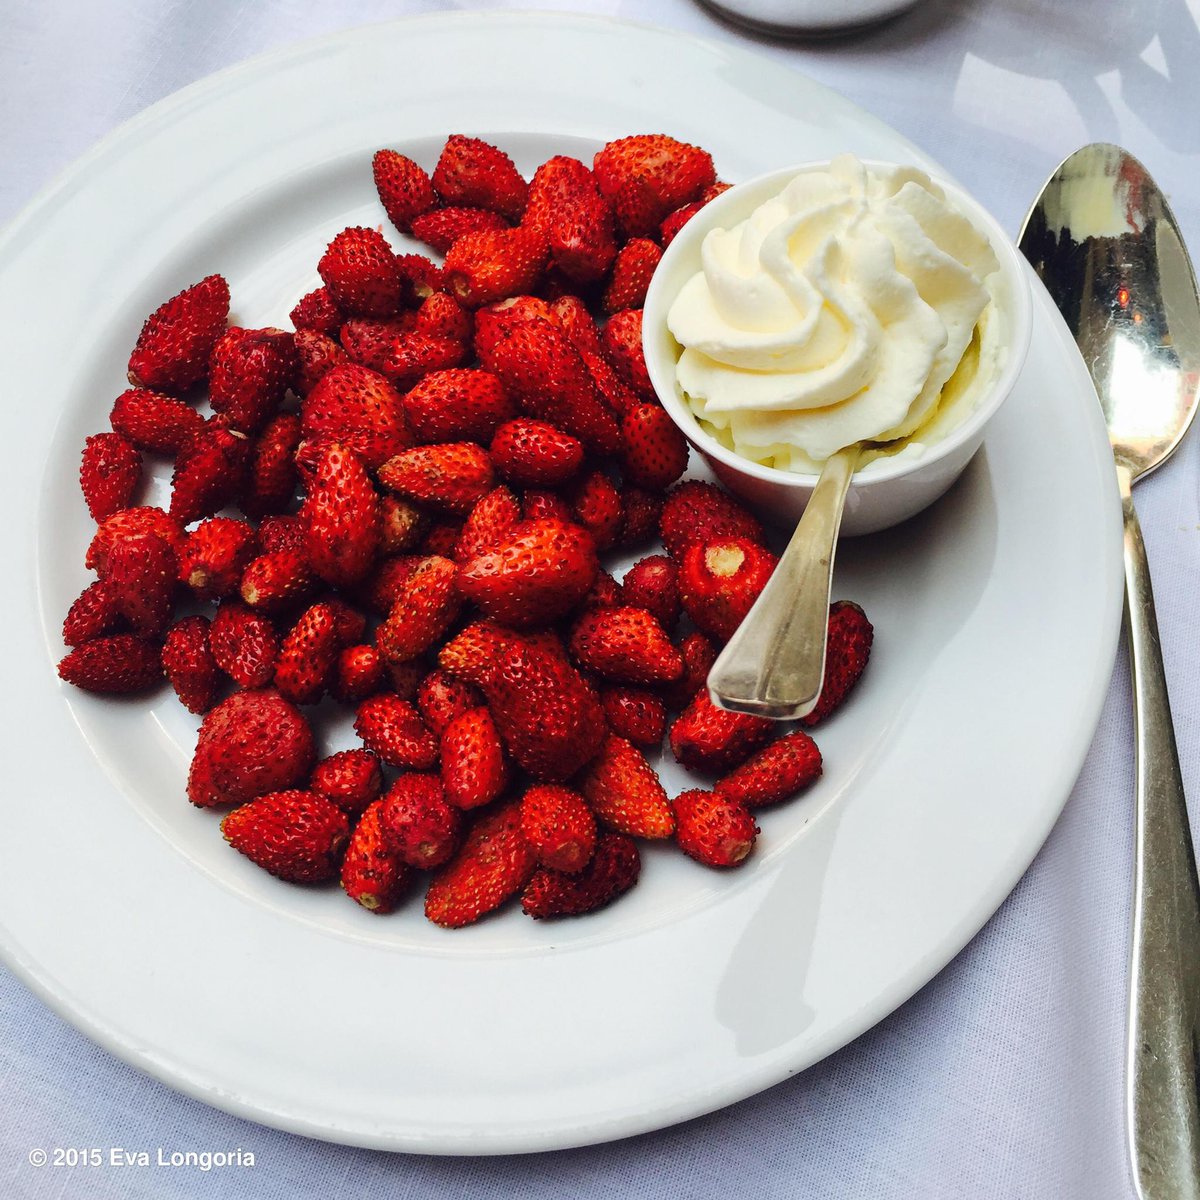 I'm in heaven with my fraises des bois! @GlobalGiftFound #Paris http://t.co/0QcT7wpkkH